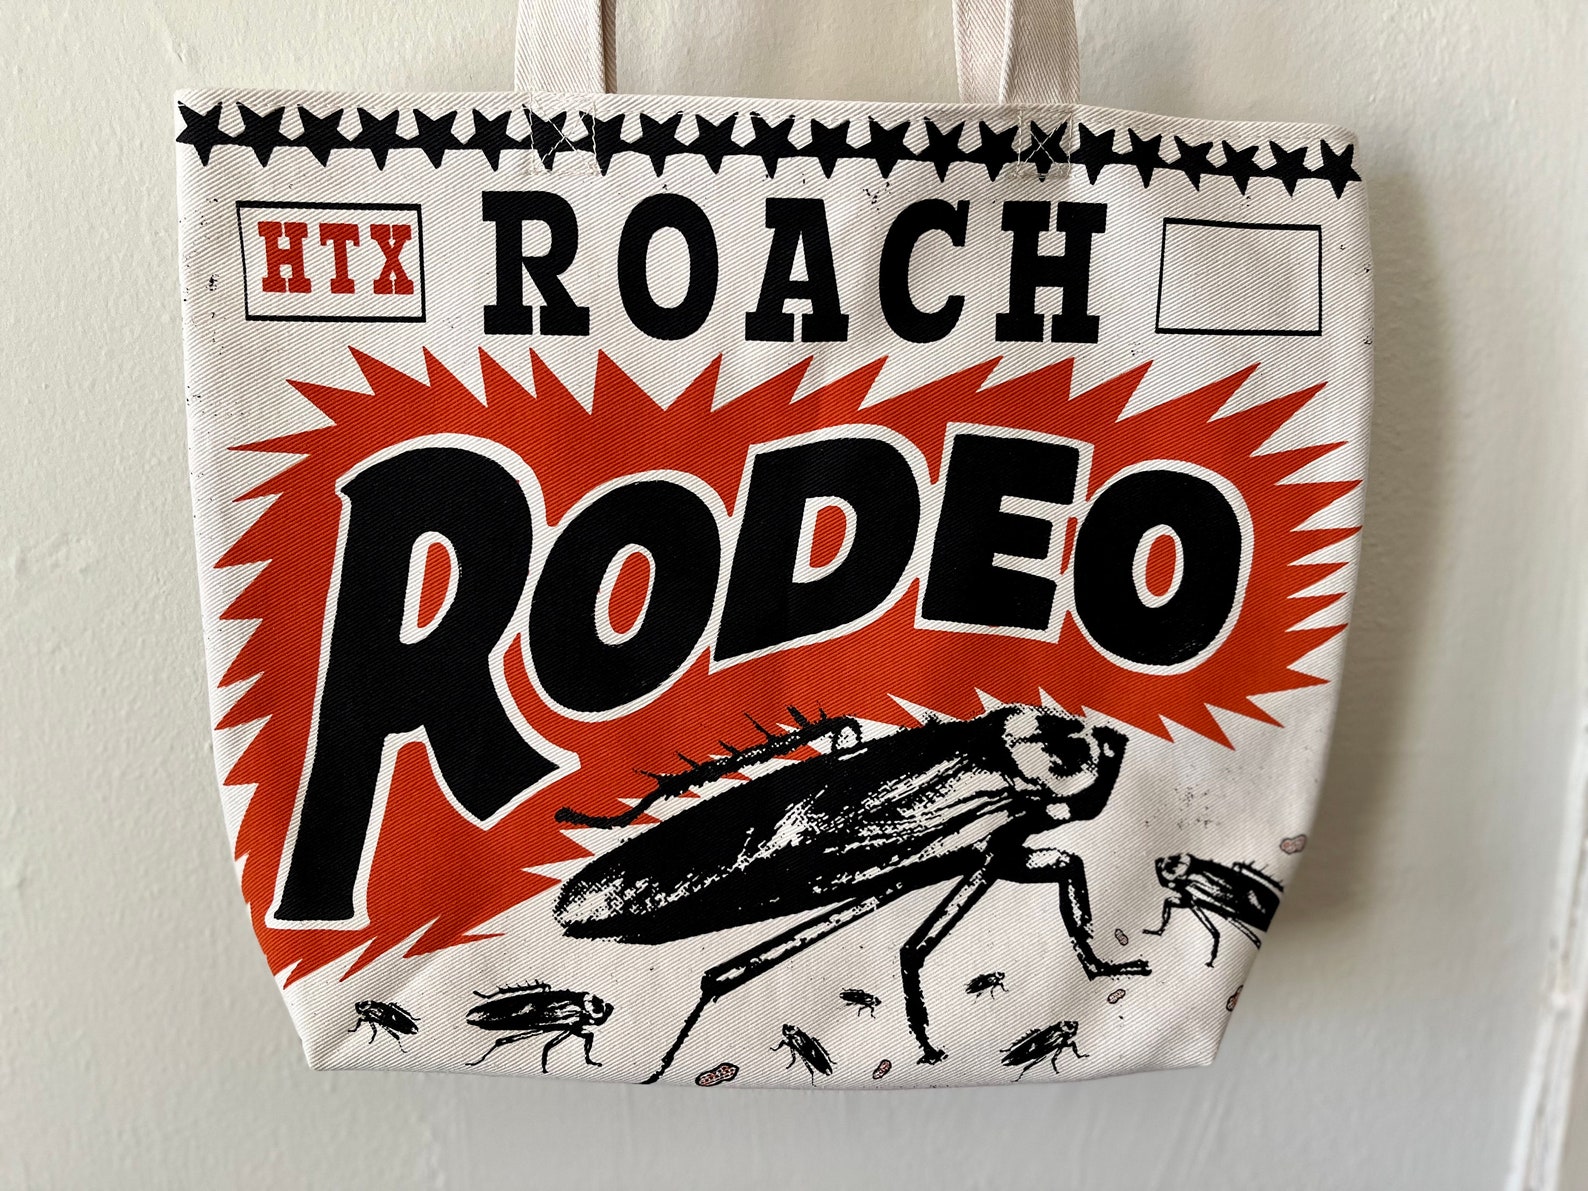 Roach Rodeo Tote